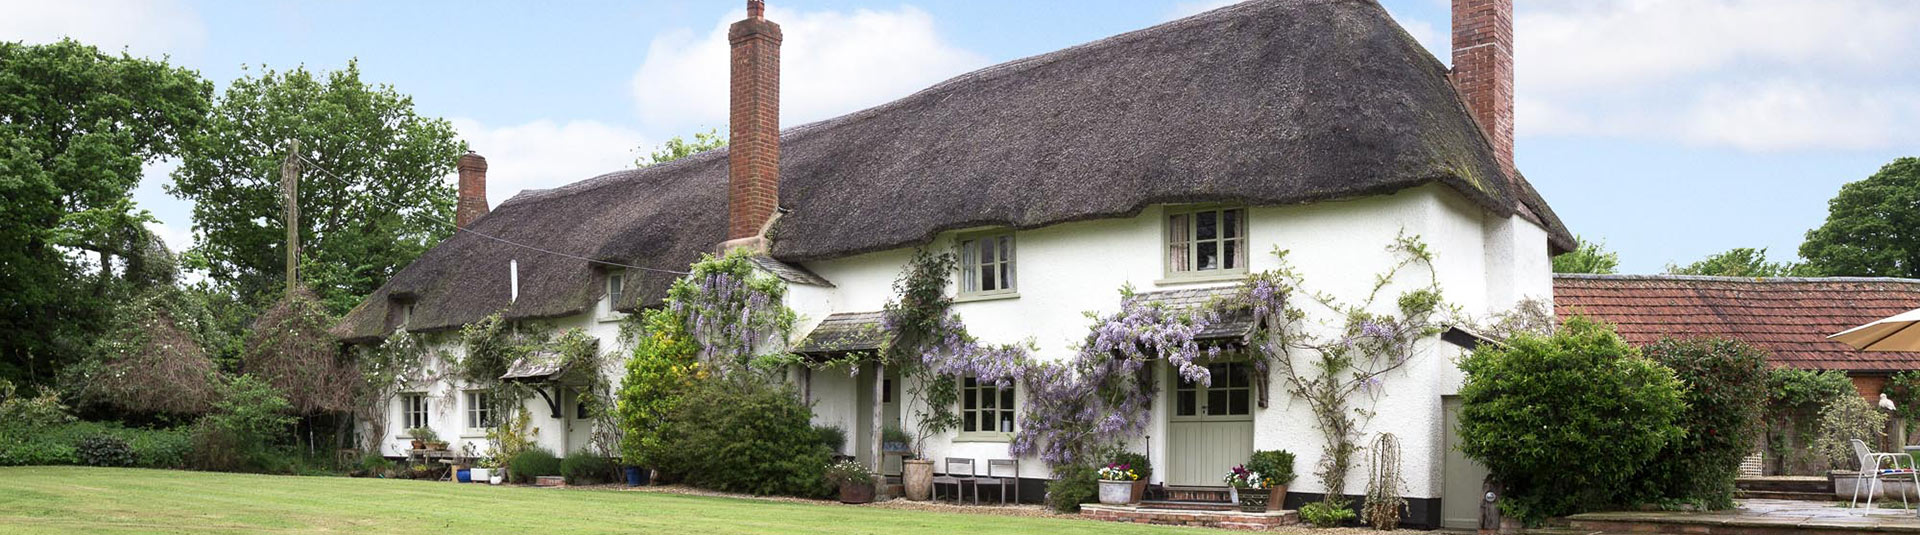 Thatched Cottage Retreats in Hampshire